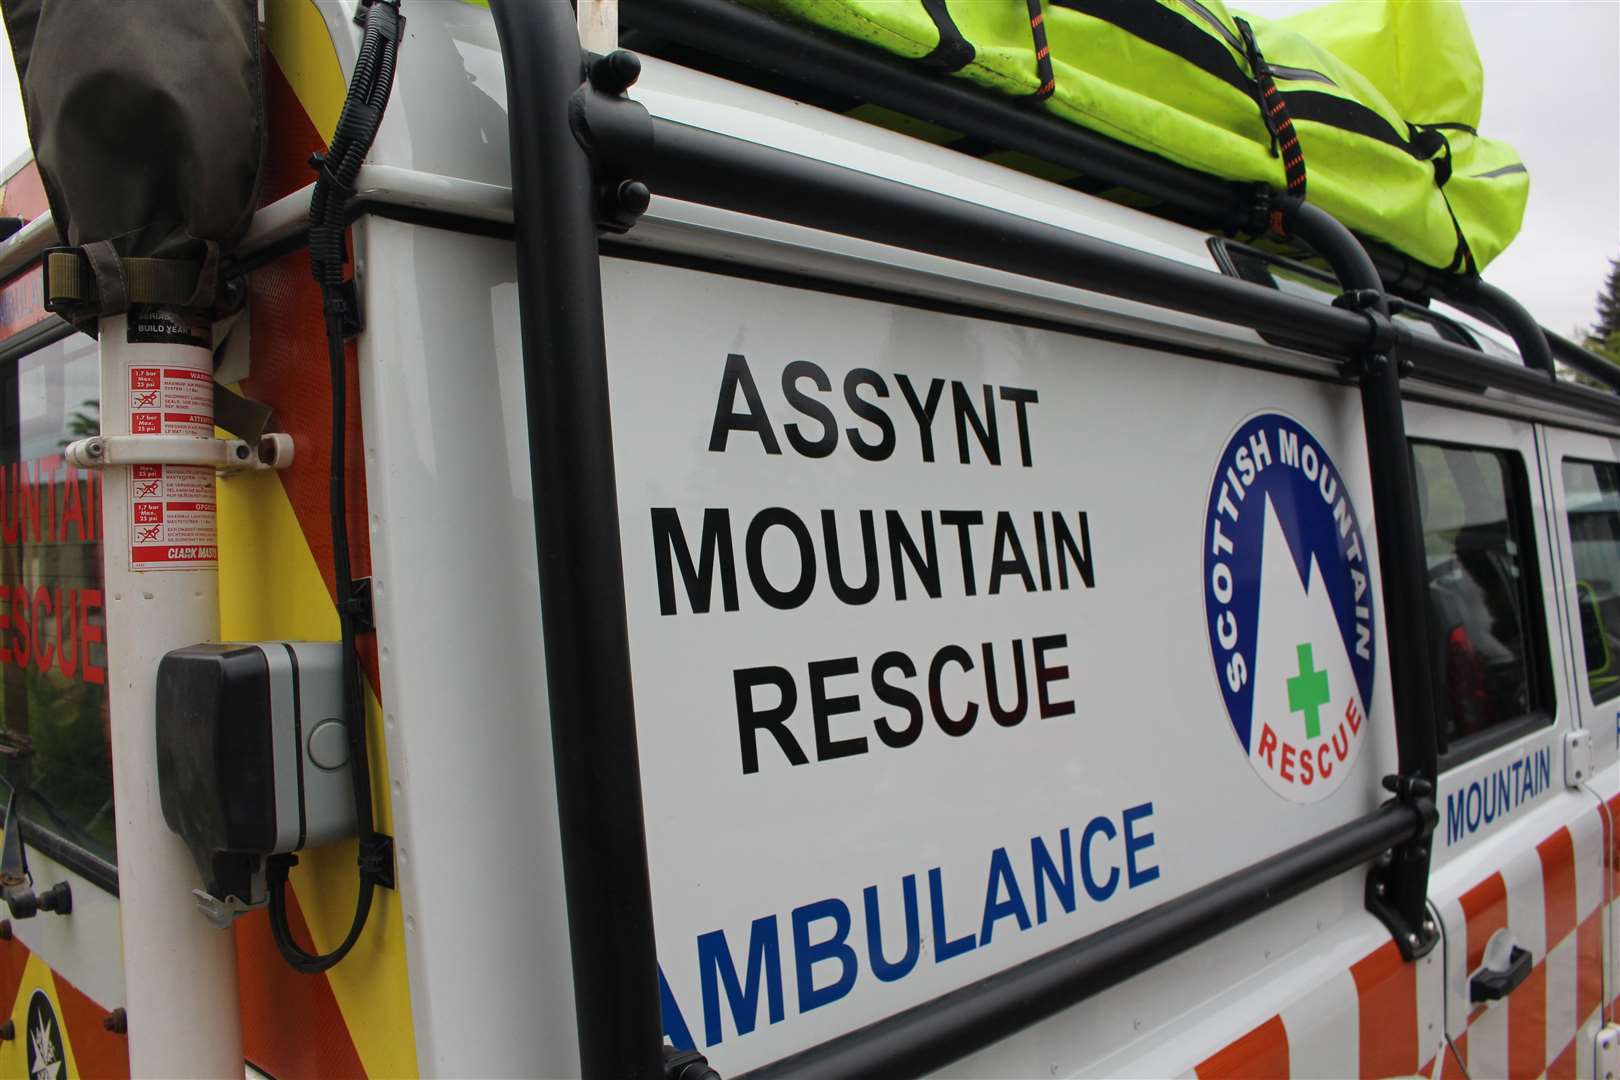 The team's 4x4 with the mountain rescue livery. Picture: John Davidson